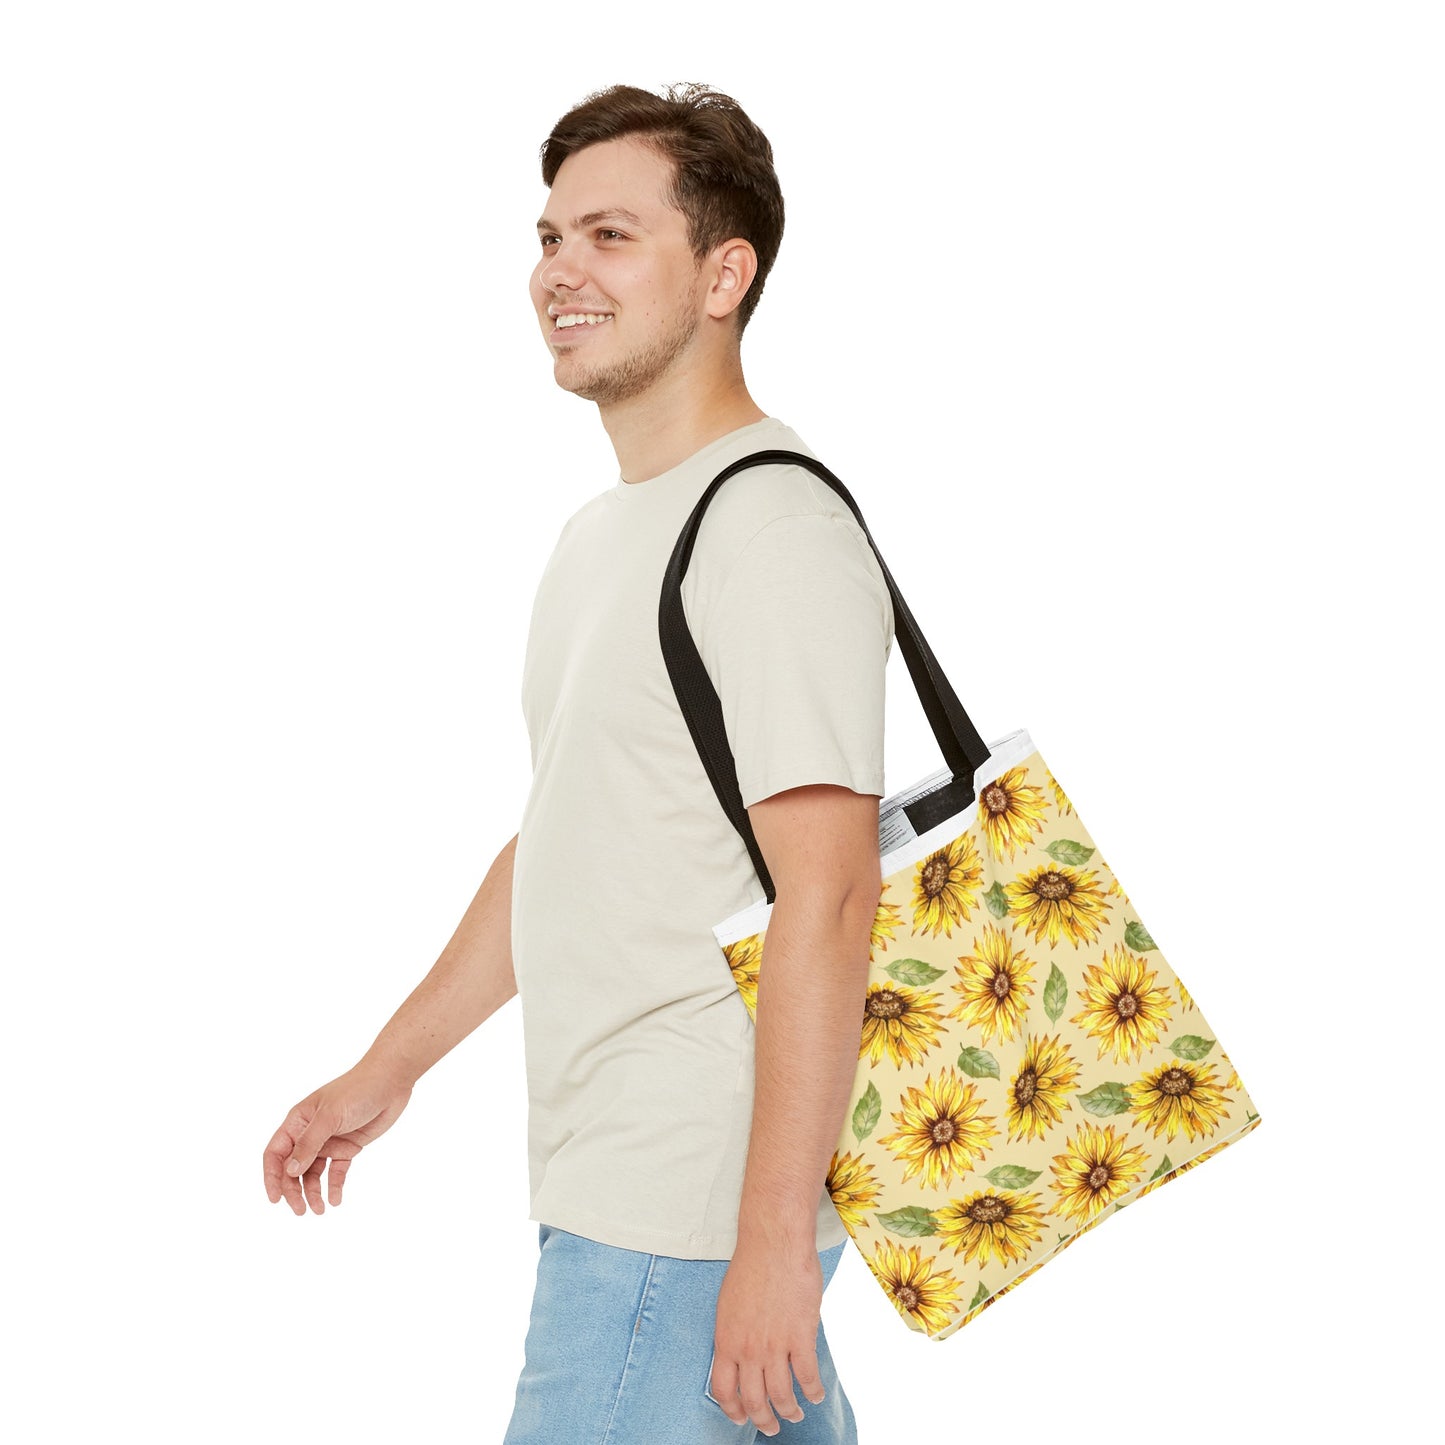 Young man smiling and walking, holding a Printify polyester tote bag with a yellow sunflower pattern, wearing a light t-shirt and jeans.